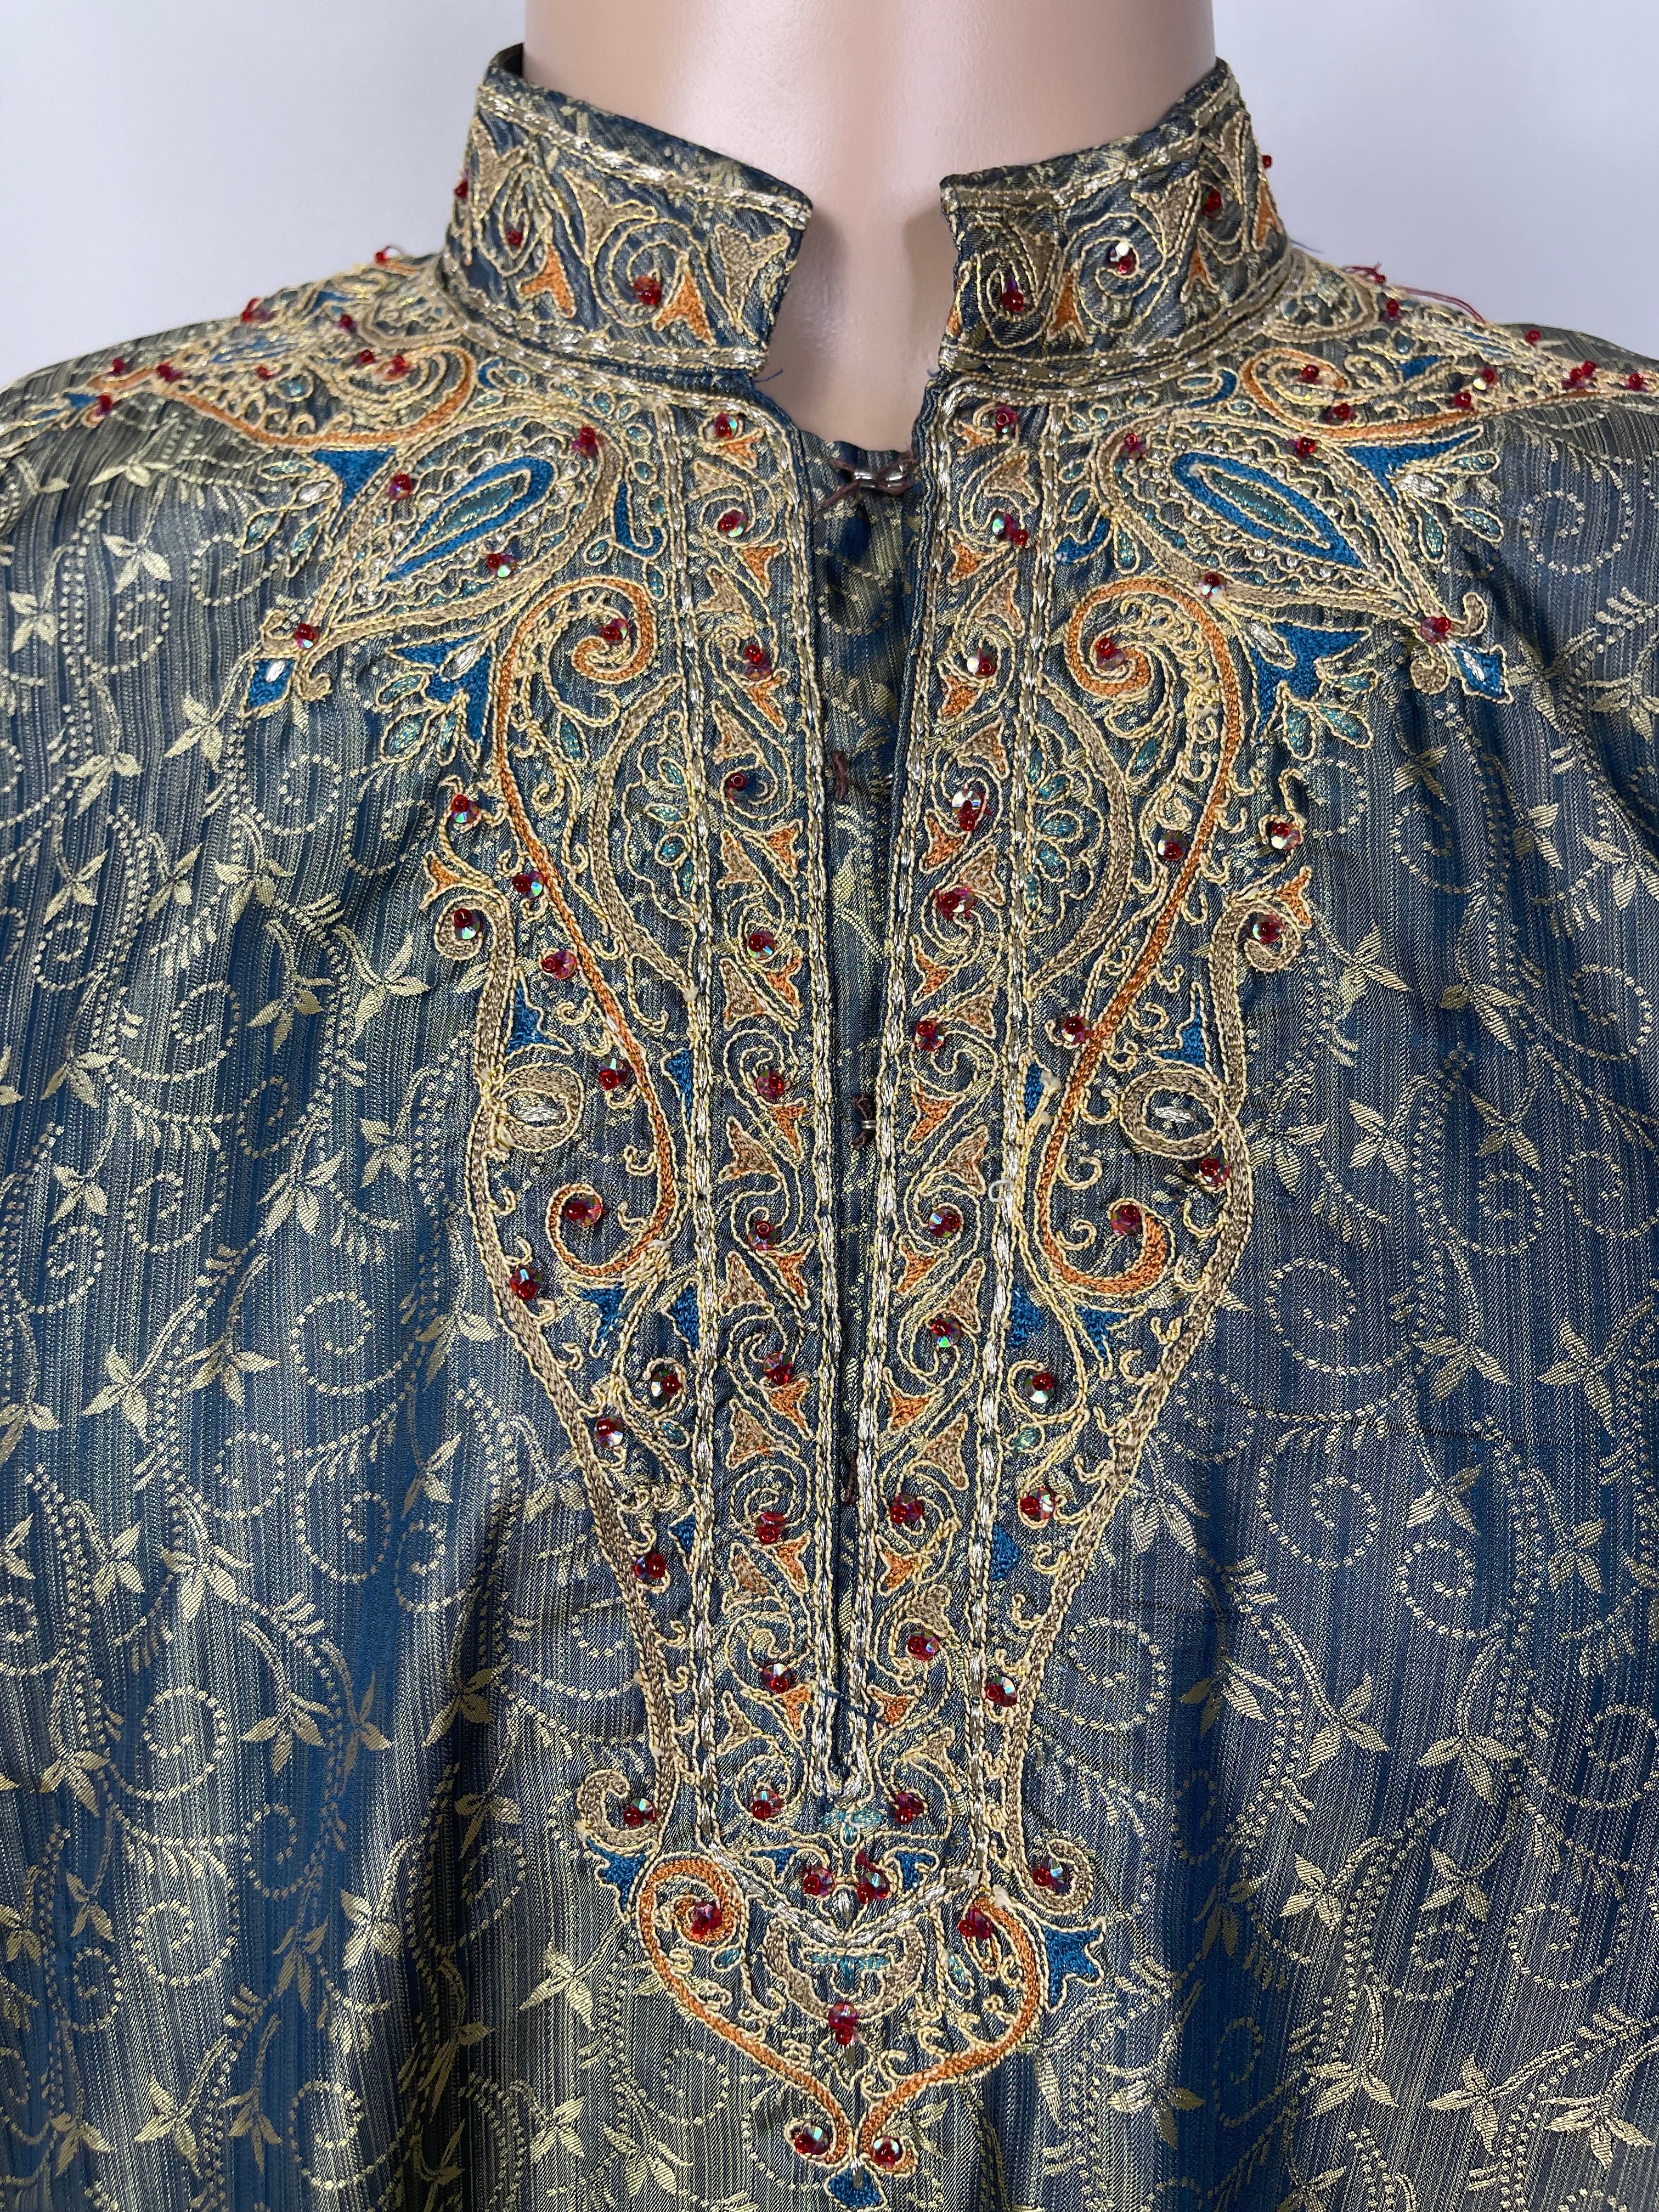 Silk gray and blue kurta paired beautifull gold embroidery and red stones.